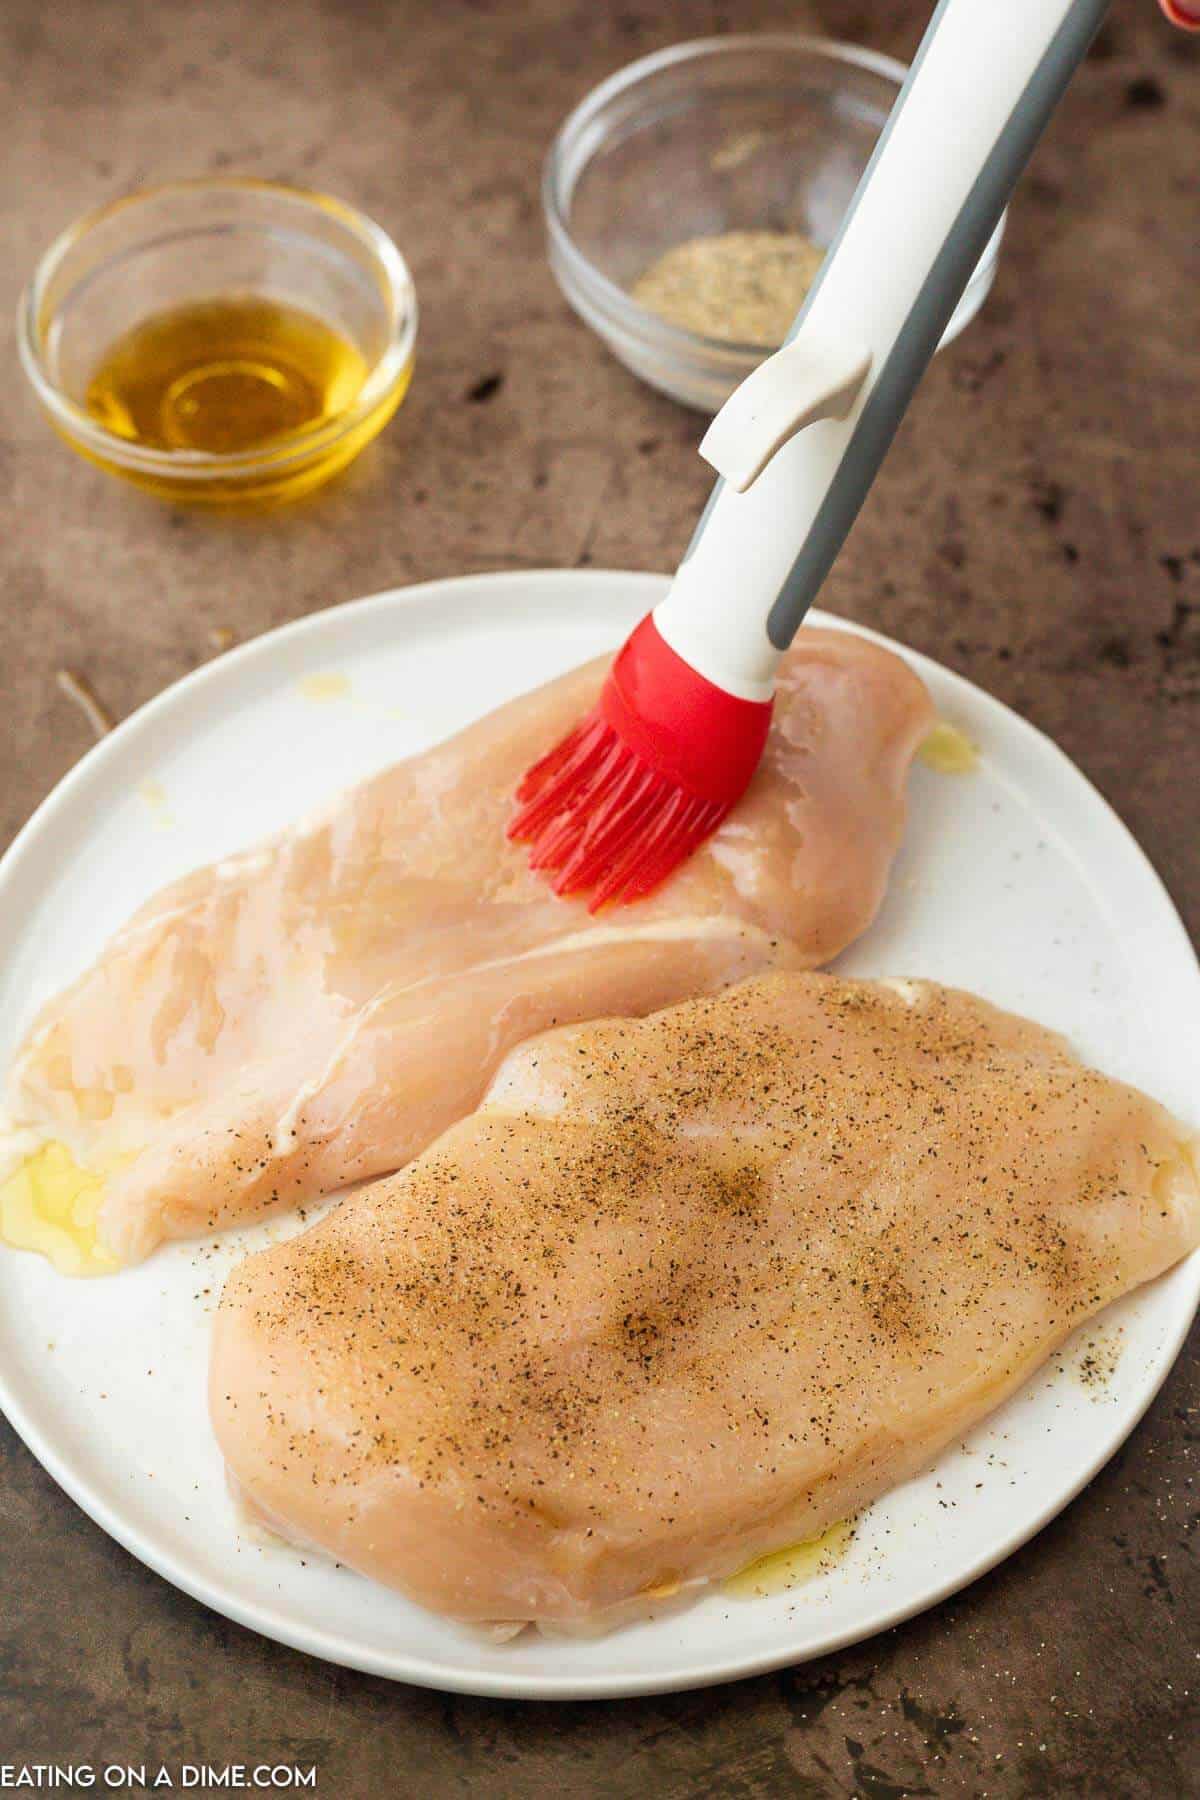 Brushing oil and seasoning on the chicken breast